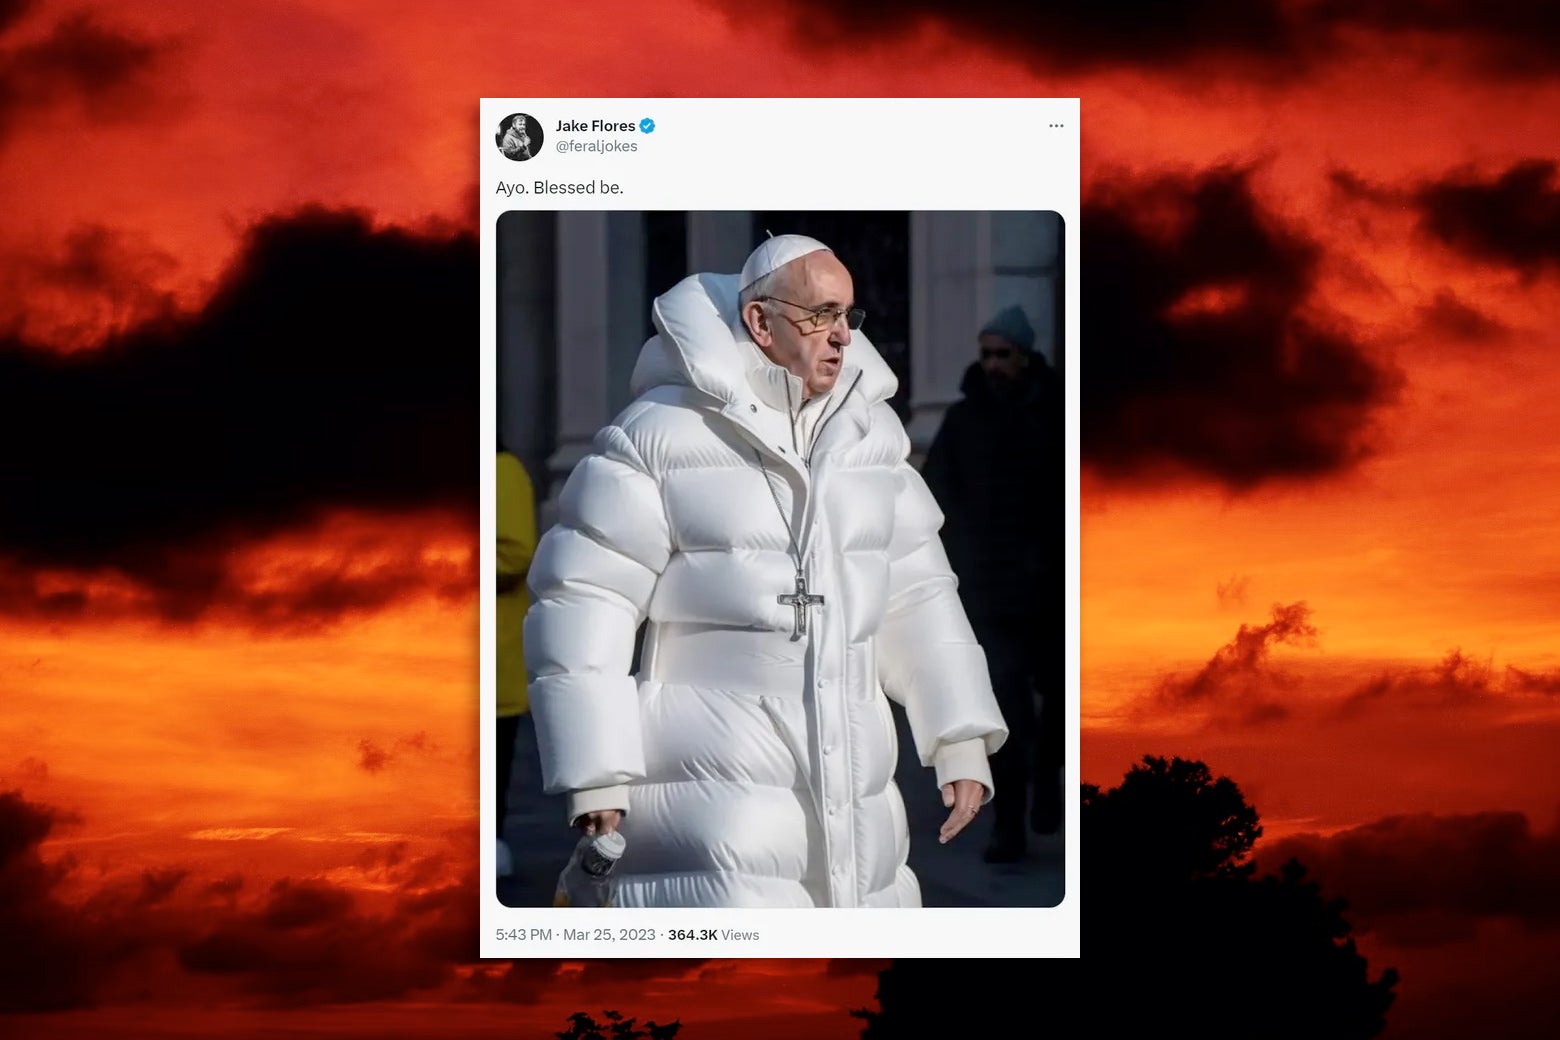 The Pope in a Coat Is Not From a Holy Place